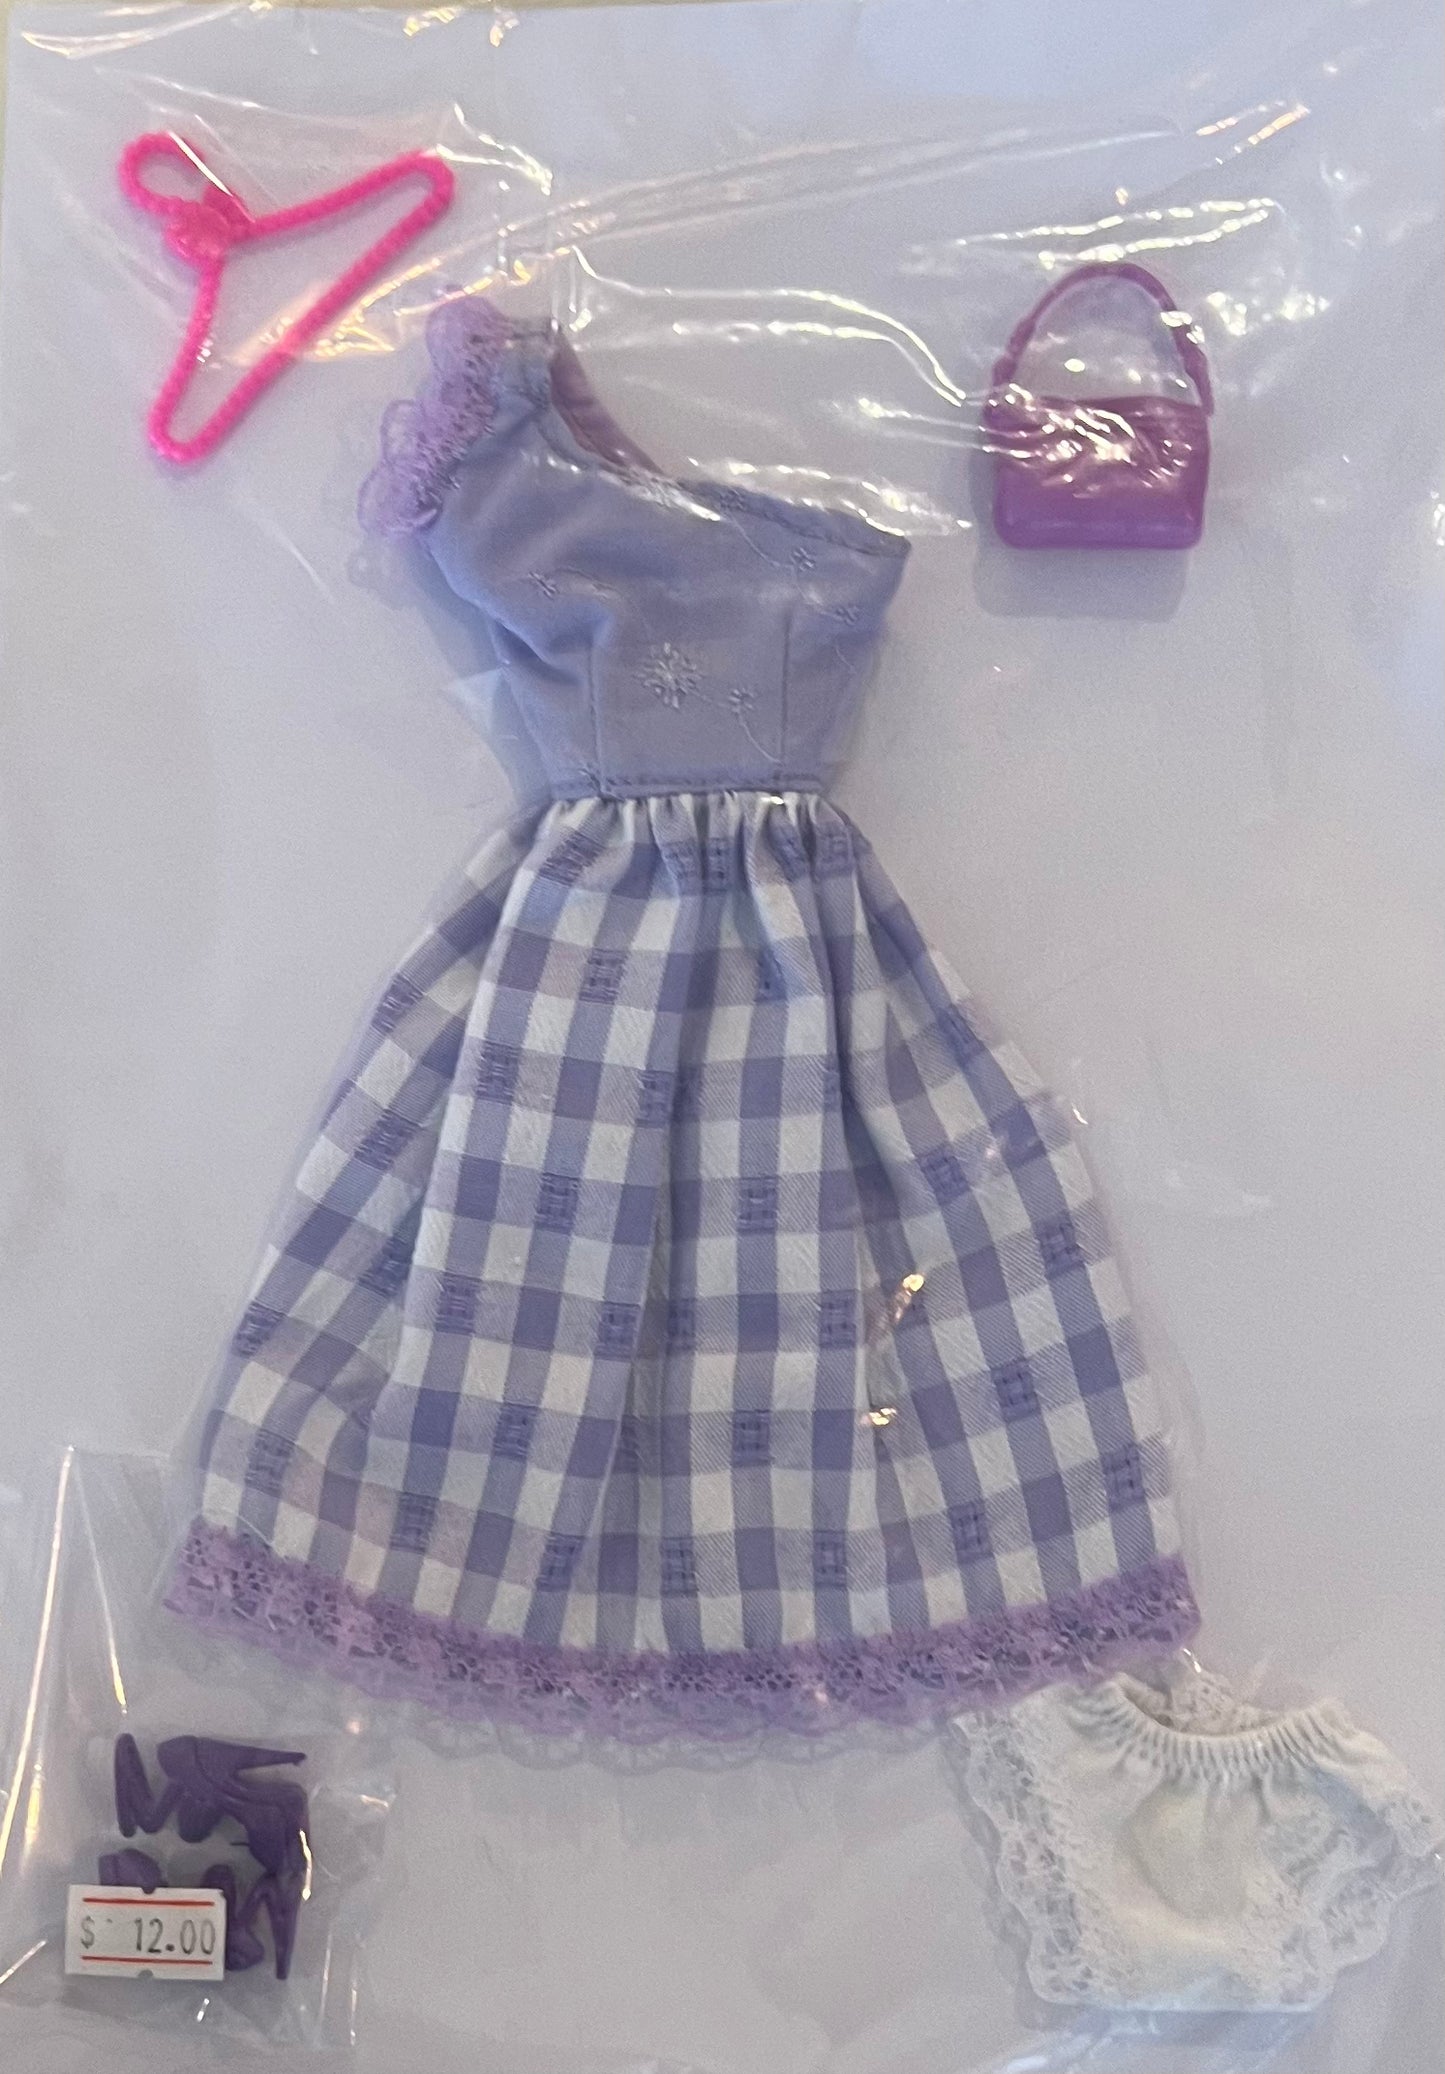 Hand-made Barbie Doll Outfits